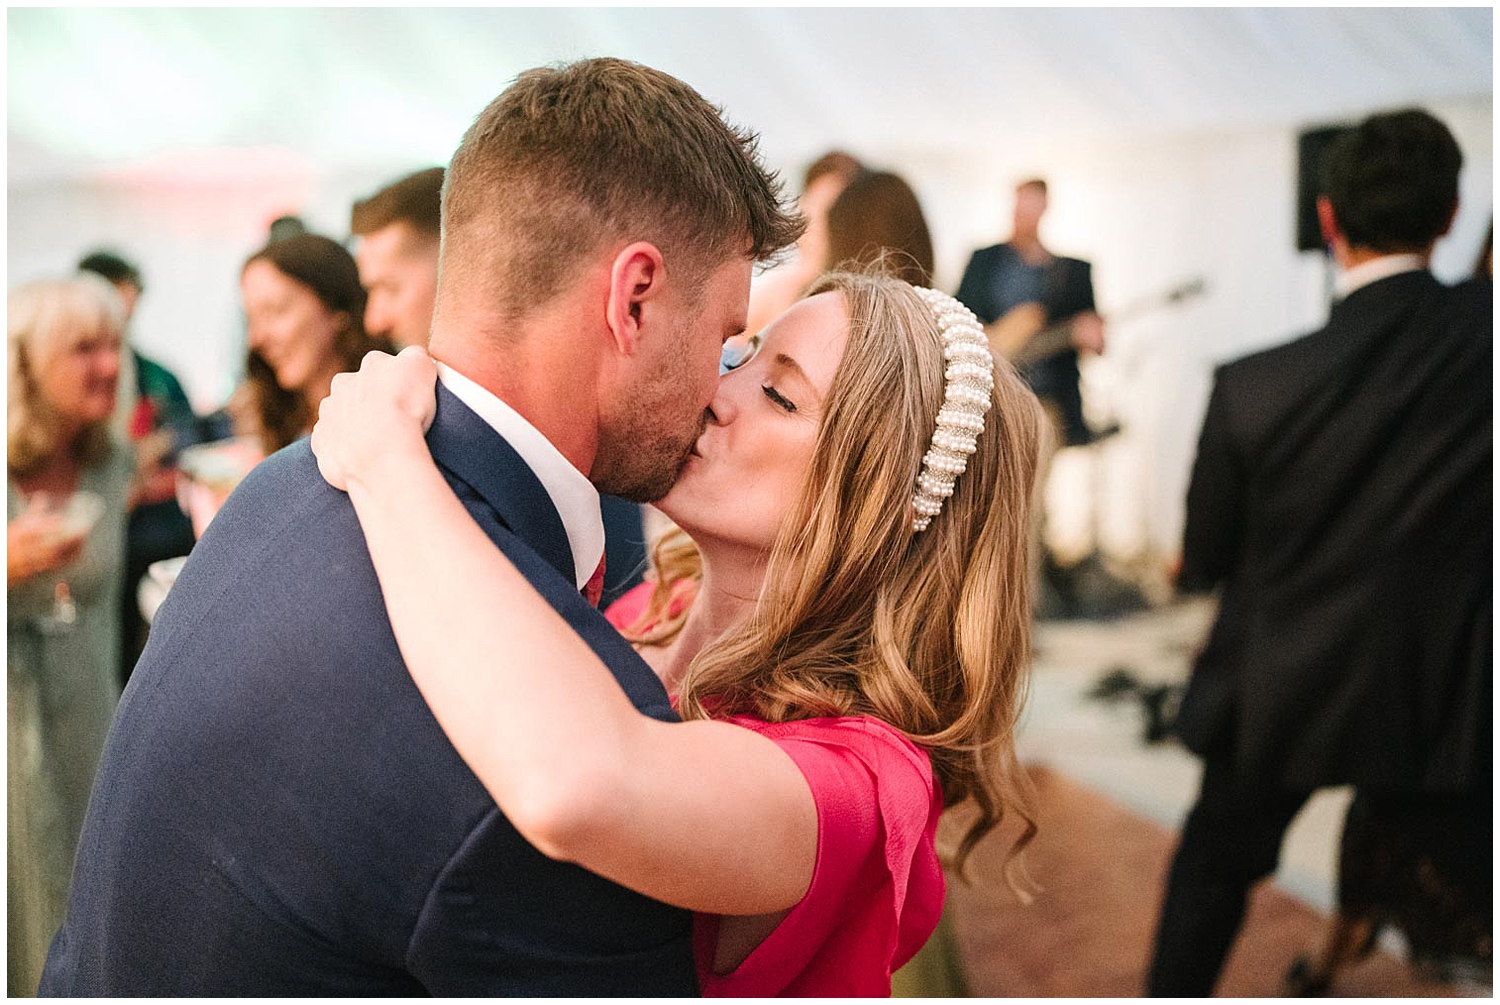 A candid shot of wedding guests kissing during the dancing. Photographed by South Yorkshire wedding photographer Kari Bellamy. 